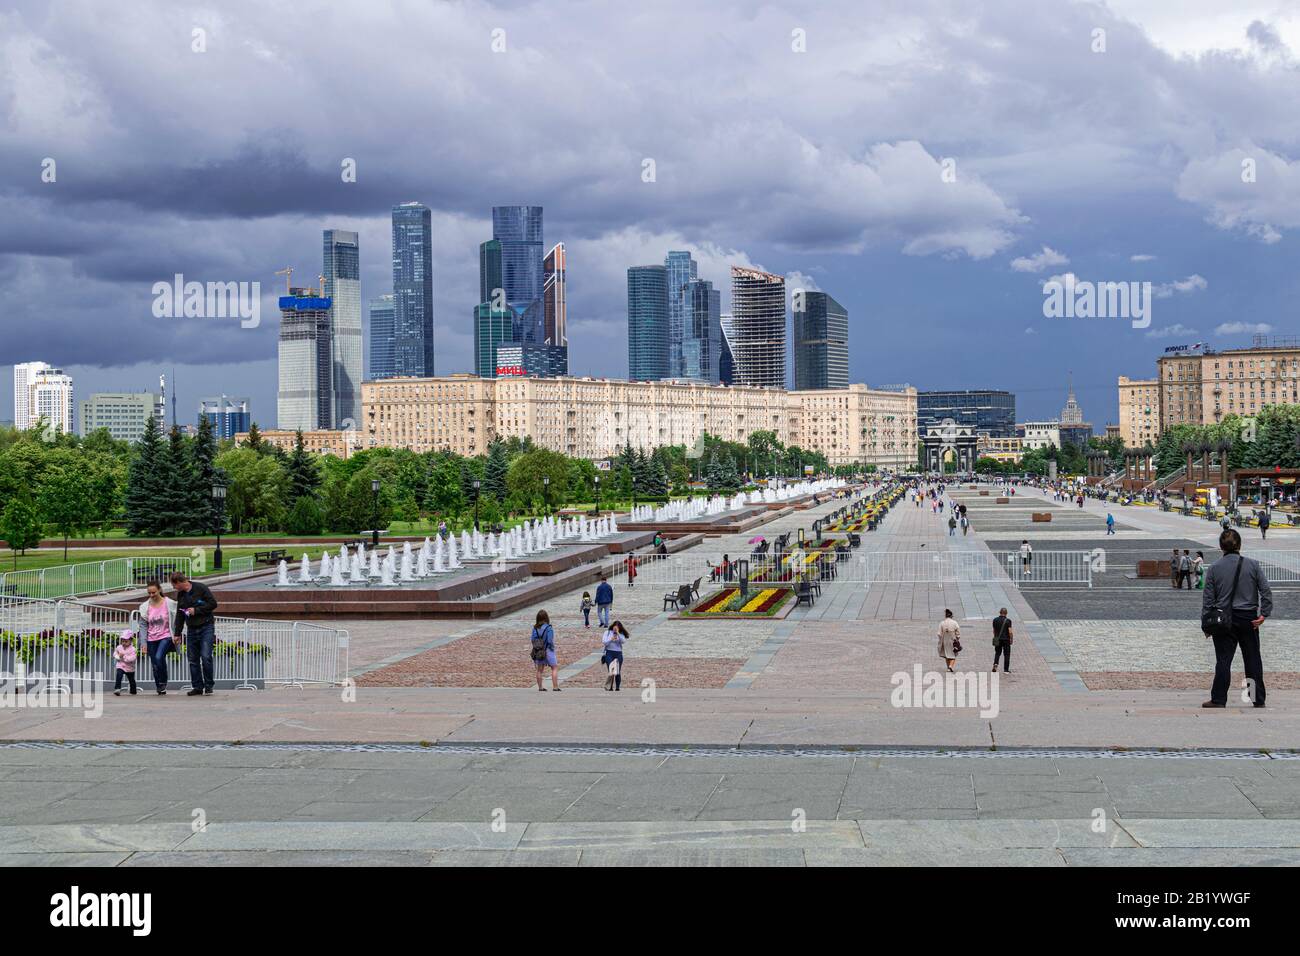 Moscow/Russia; June 06 2019: Victory Park on Poklonnaya Hill, with Moscow City skyline background Stock Photo